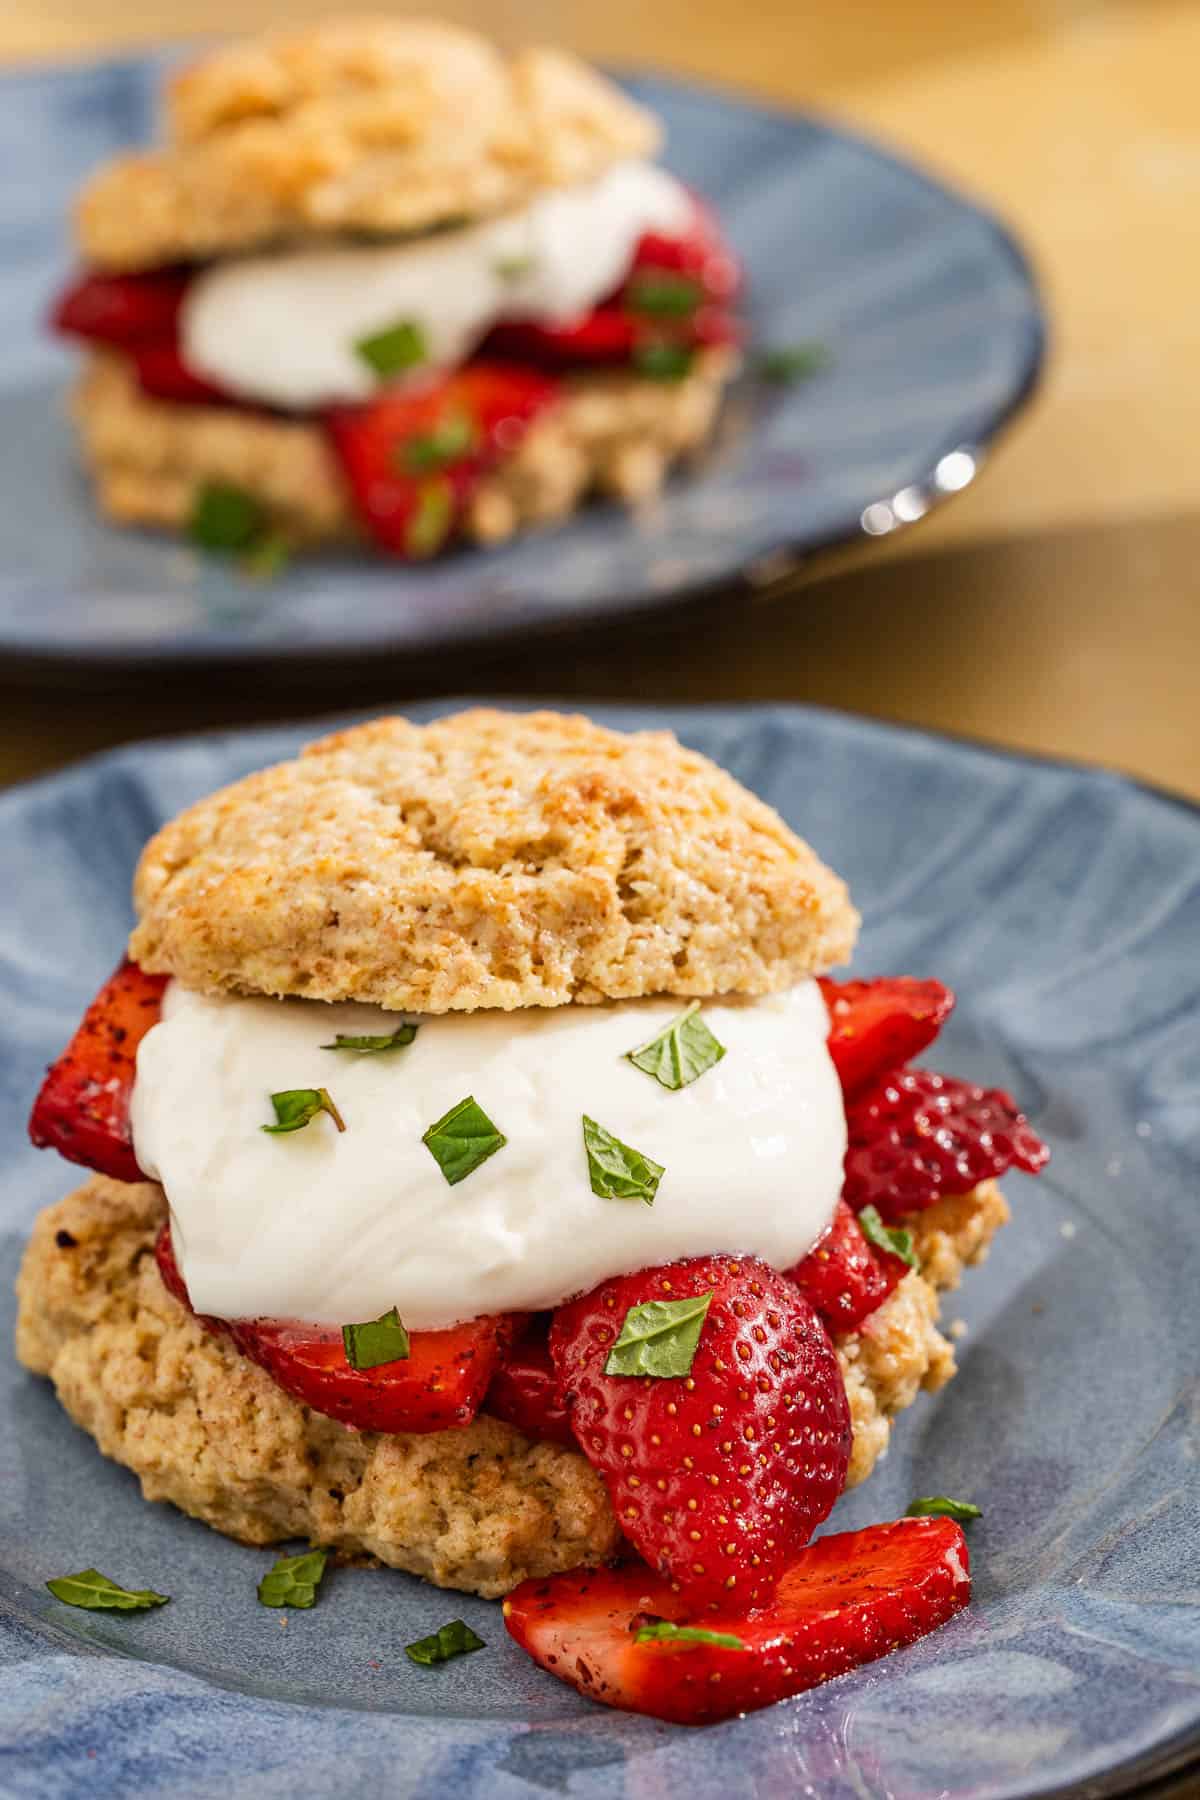 A close up of a strawberry shortcake on a plate in front of another shortcake on a plate.